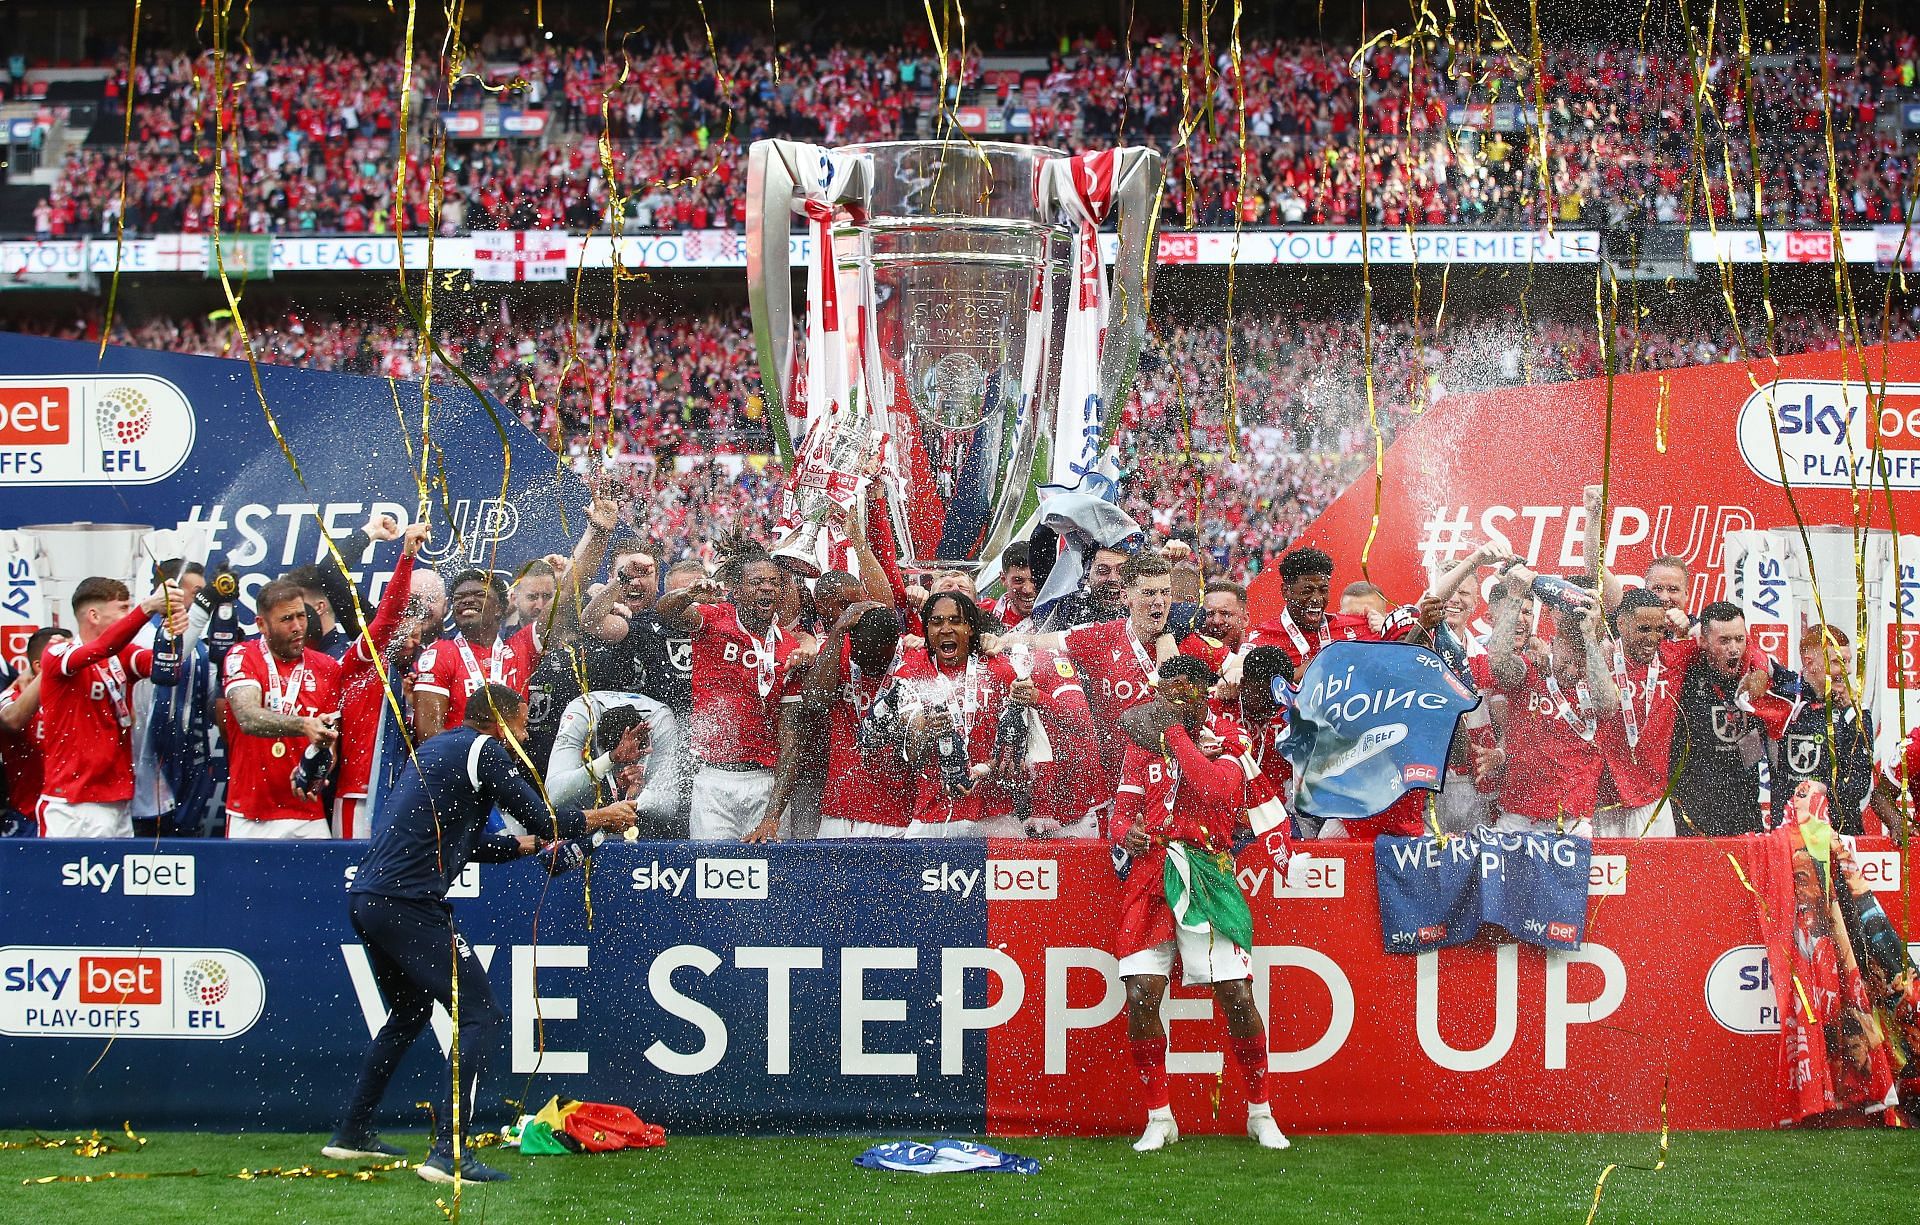 Nottingham Forest will be playing the Premier League next season